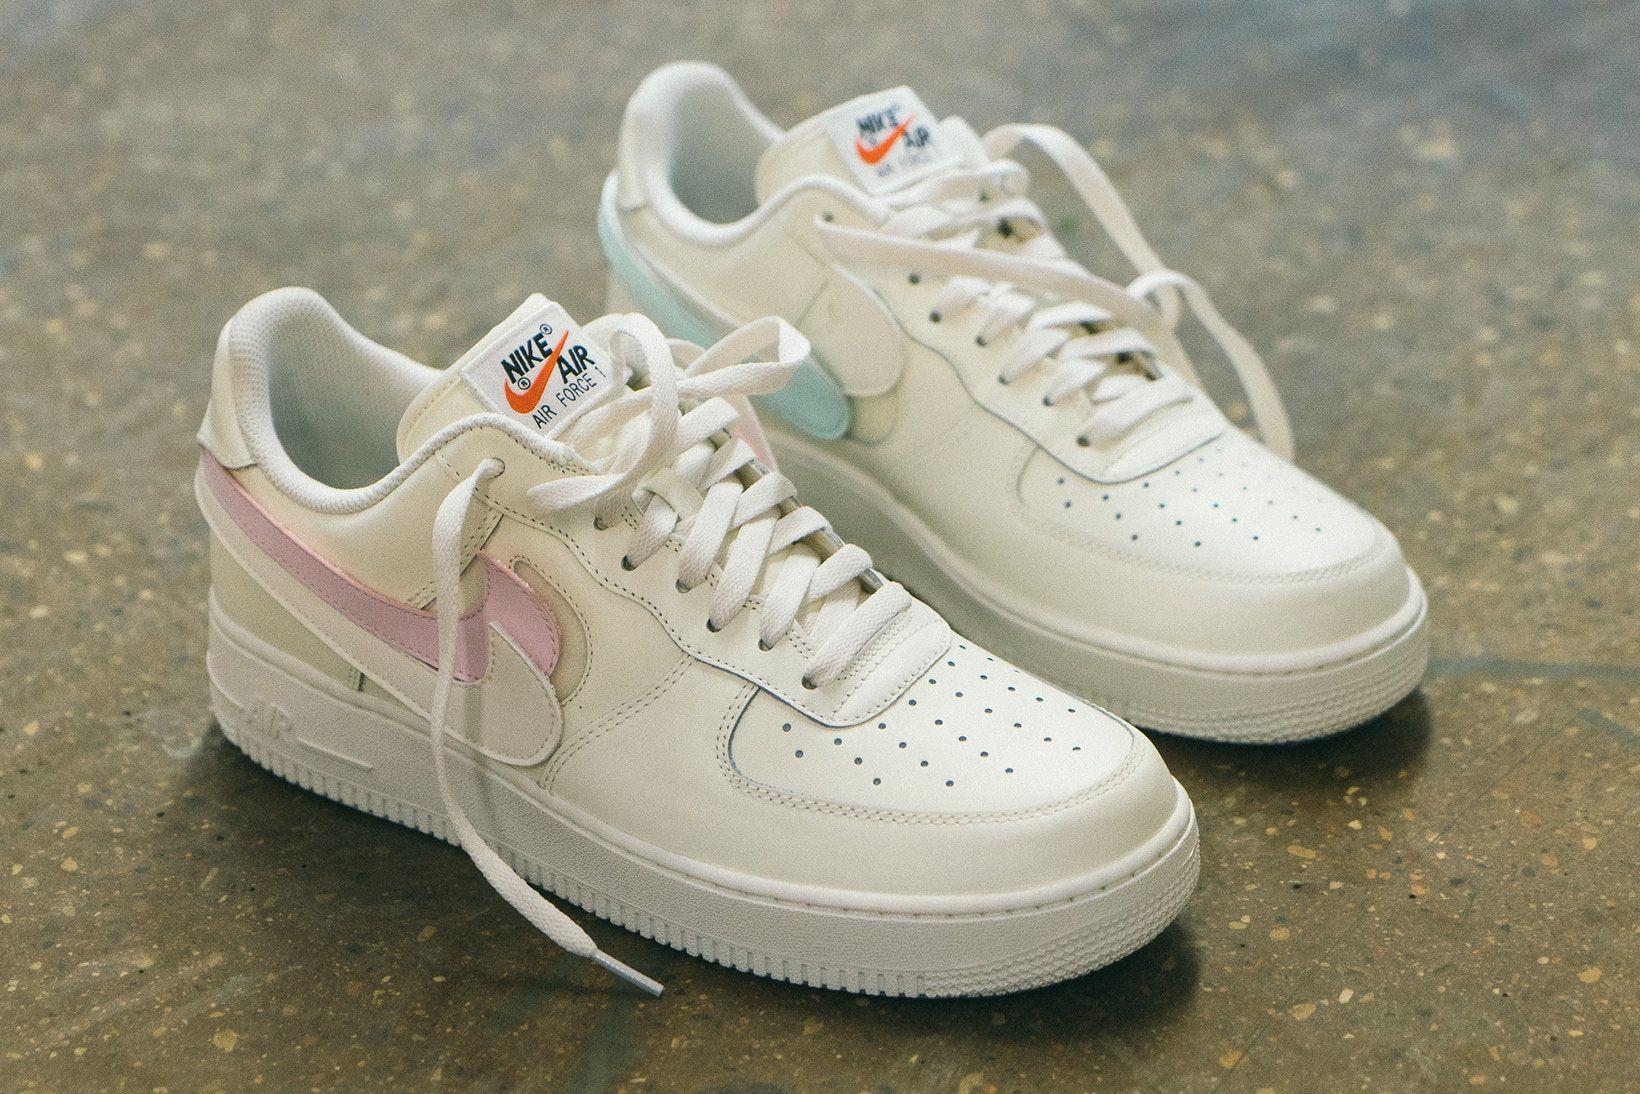 Pastel Nike Logo - Nike's Customisable Air Force 1 Is Launching With Pretty Pastel ...